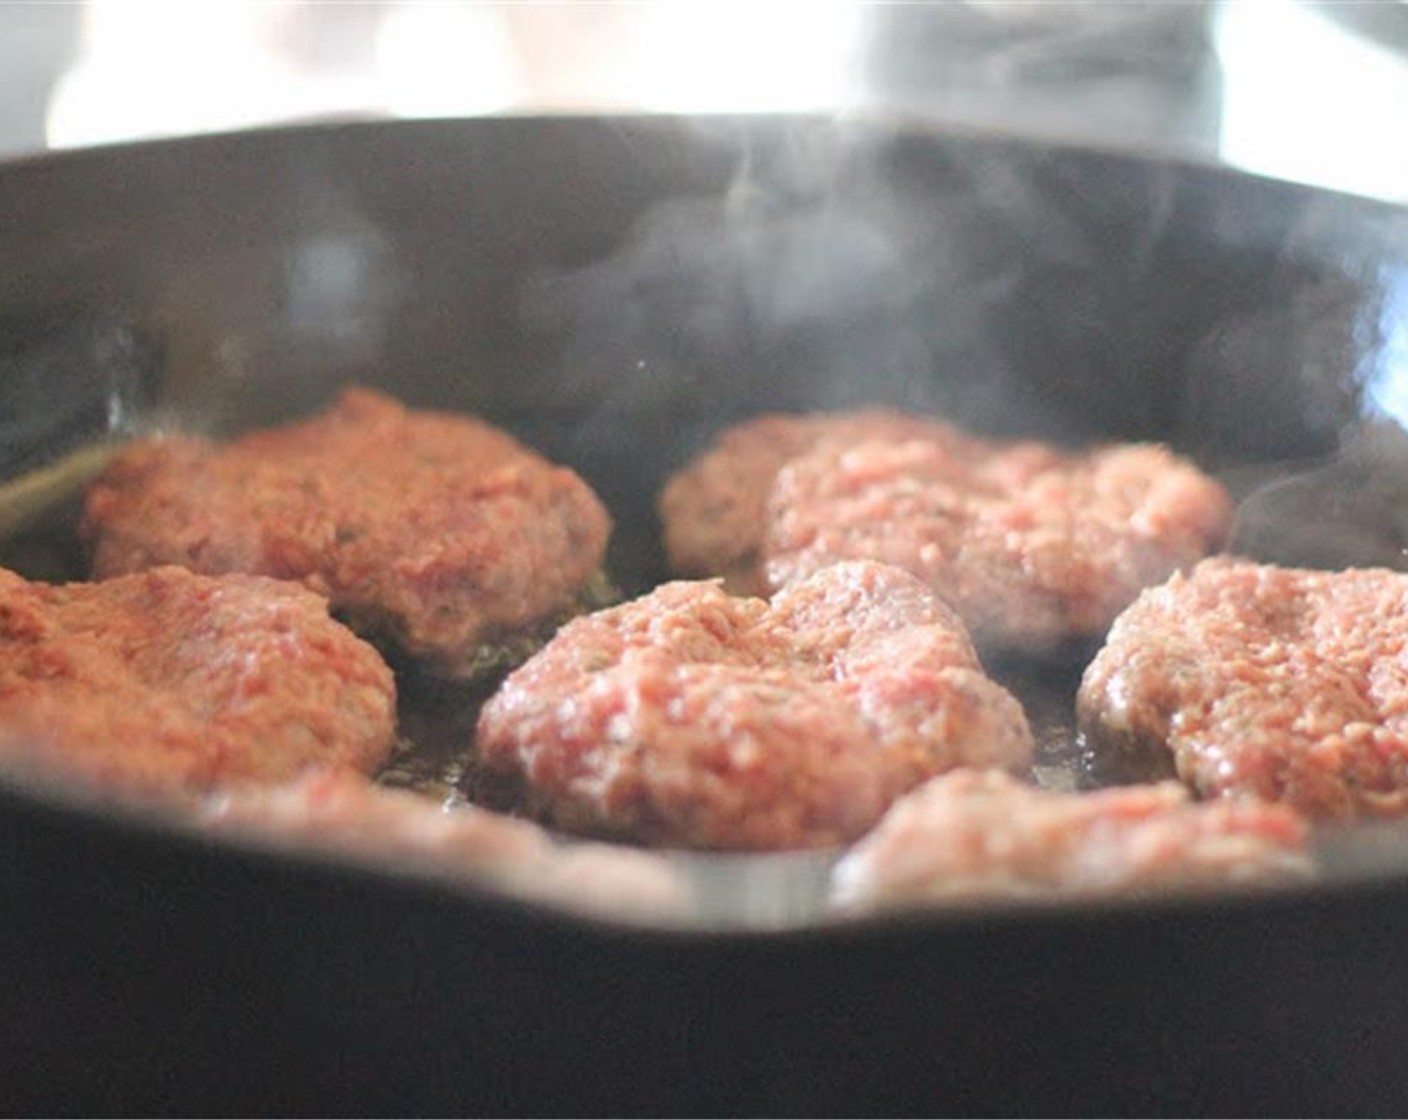 step 4 Add a little more butter or palm oil to a pan over medium high heat because these will want to stick. When hot, add the patties to the pan and cook in batches. Make sure not to crowd the patties.